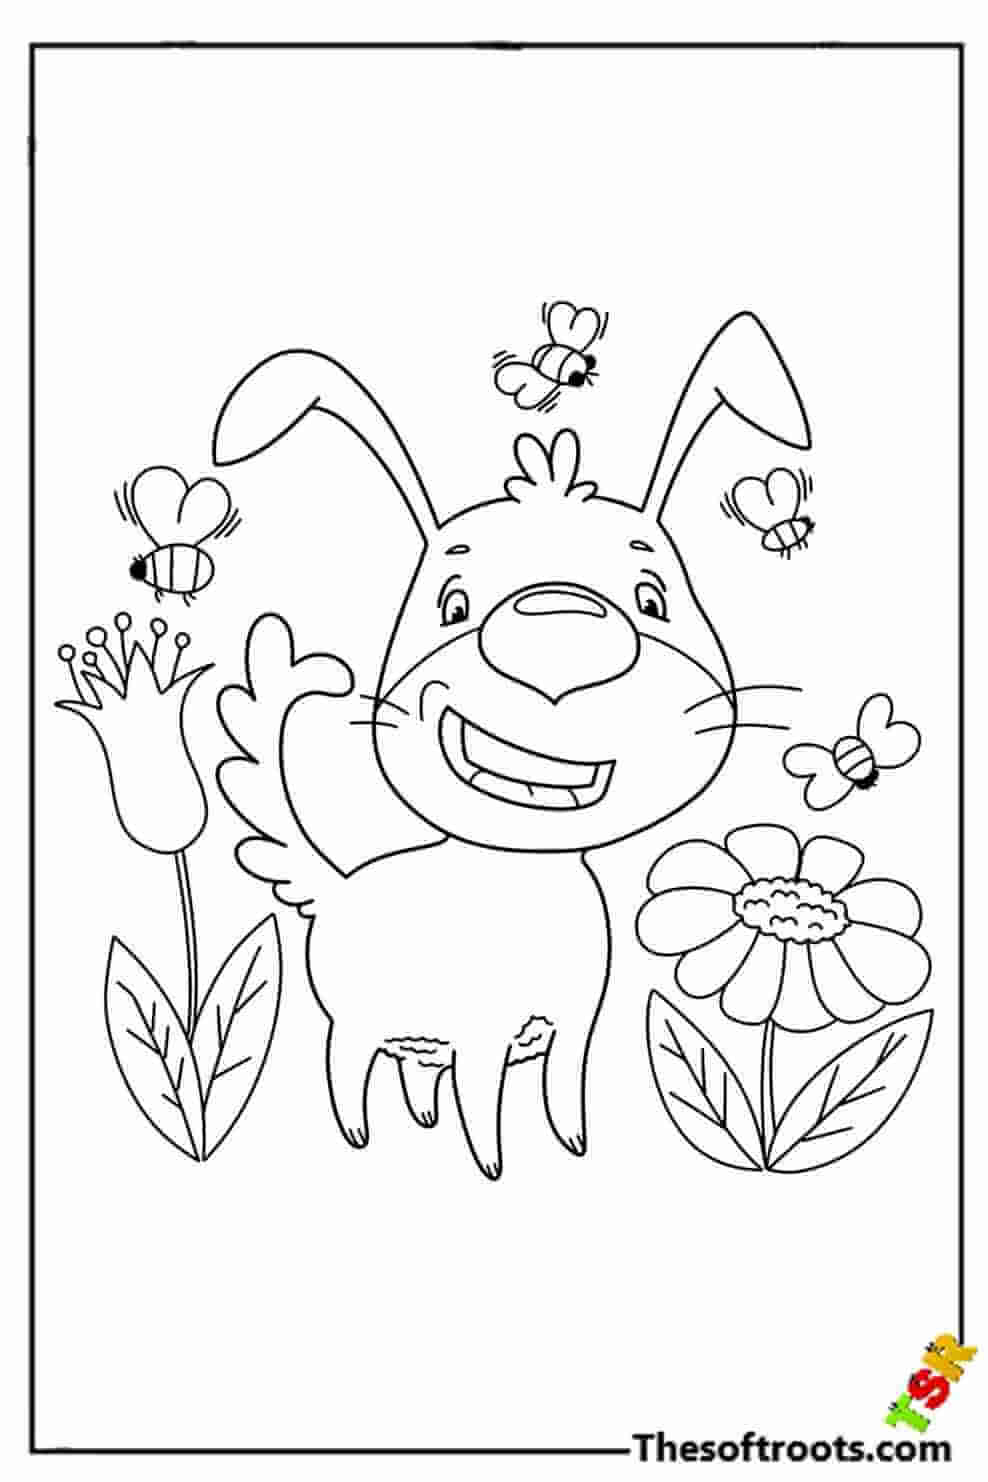 Puppy with flowers coloring pages